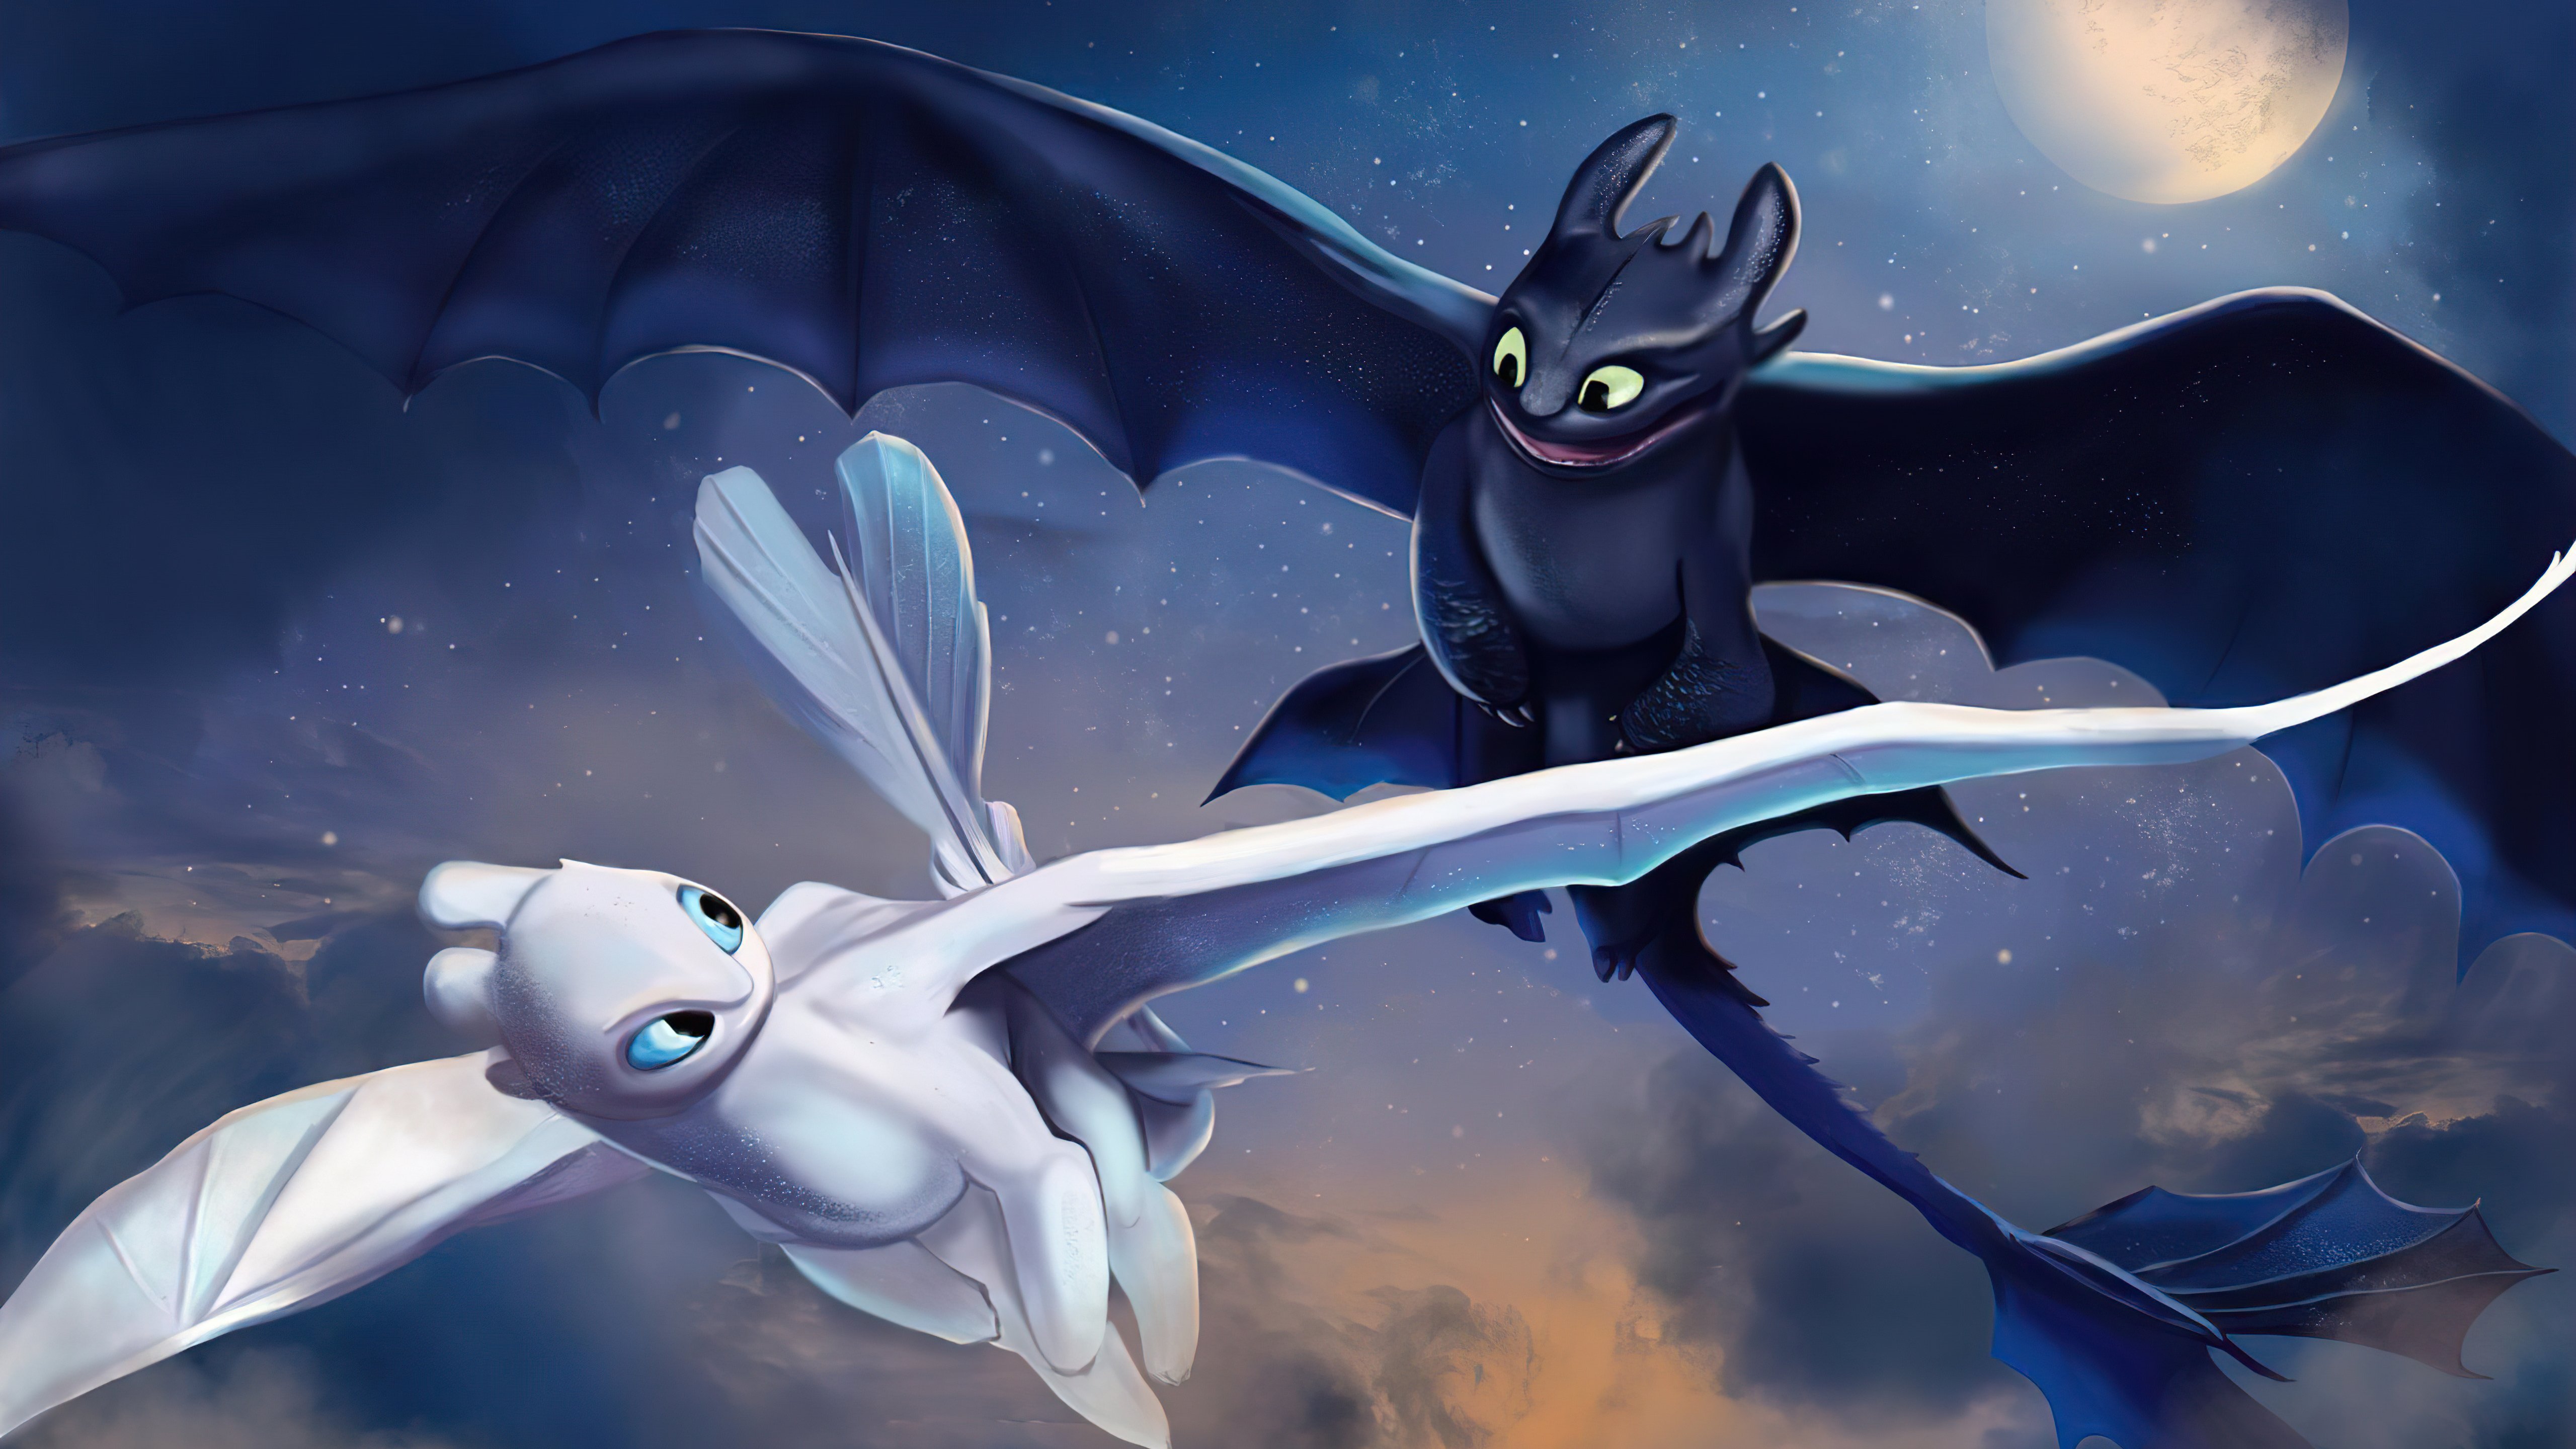 toothless and light fury wallpaper, how to train your dragon, como entrenar...